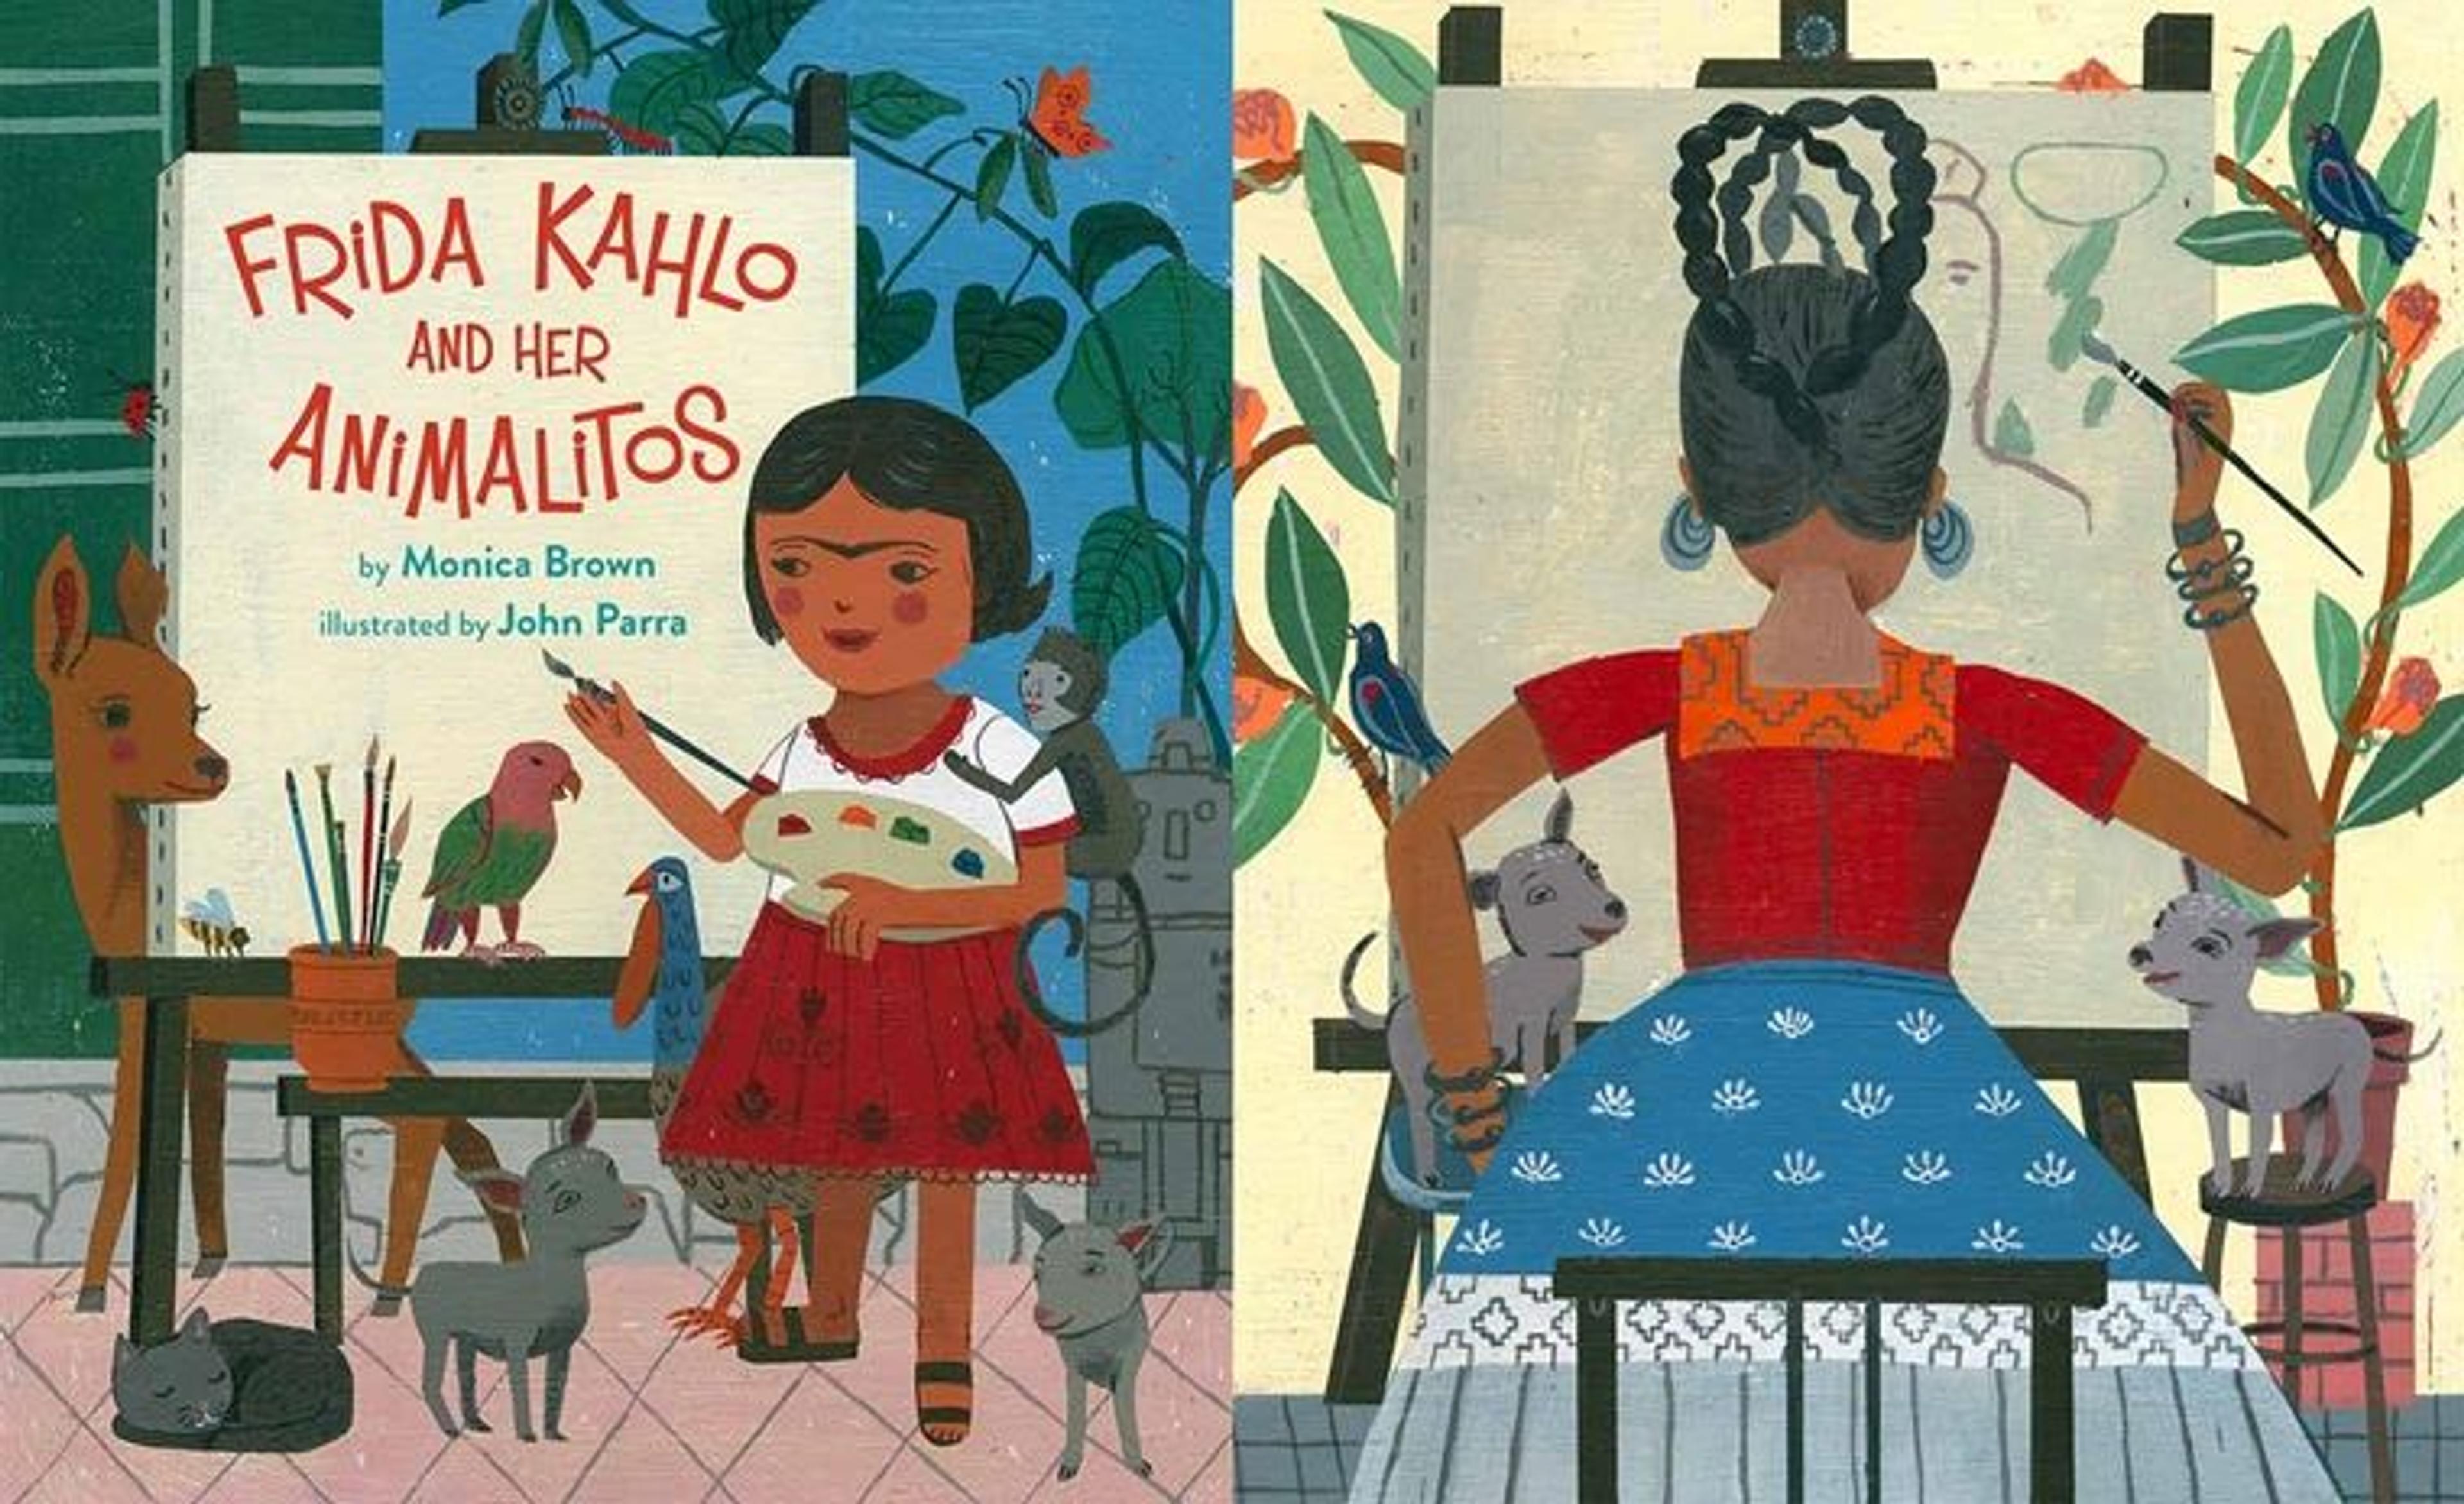 Left: the book cover for Frida Kahlo and her Animalitos. A young Frida Kahlo stands at an easel which displays the title and author and illustrator credits of the book. She holds a paint pallette and is surrounded by plants and animals including parrots, deer, and dogs. Right: An illustration of Frida Kahlo seated in front of an empty canvas with her back turned to the viewer She holds a paintbrush to the canvas. Two small animals are at either side and an orange plant grows from a planter to the right of the canvas.